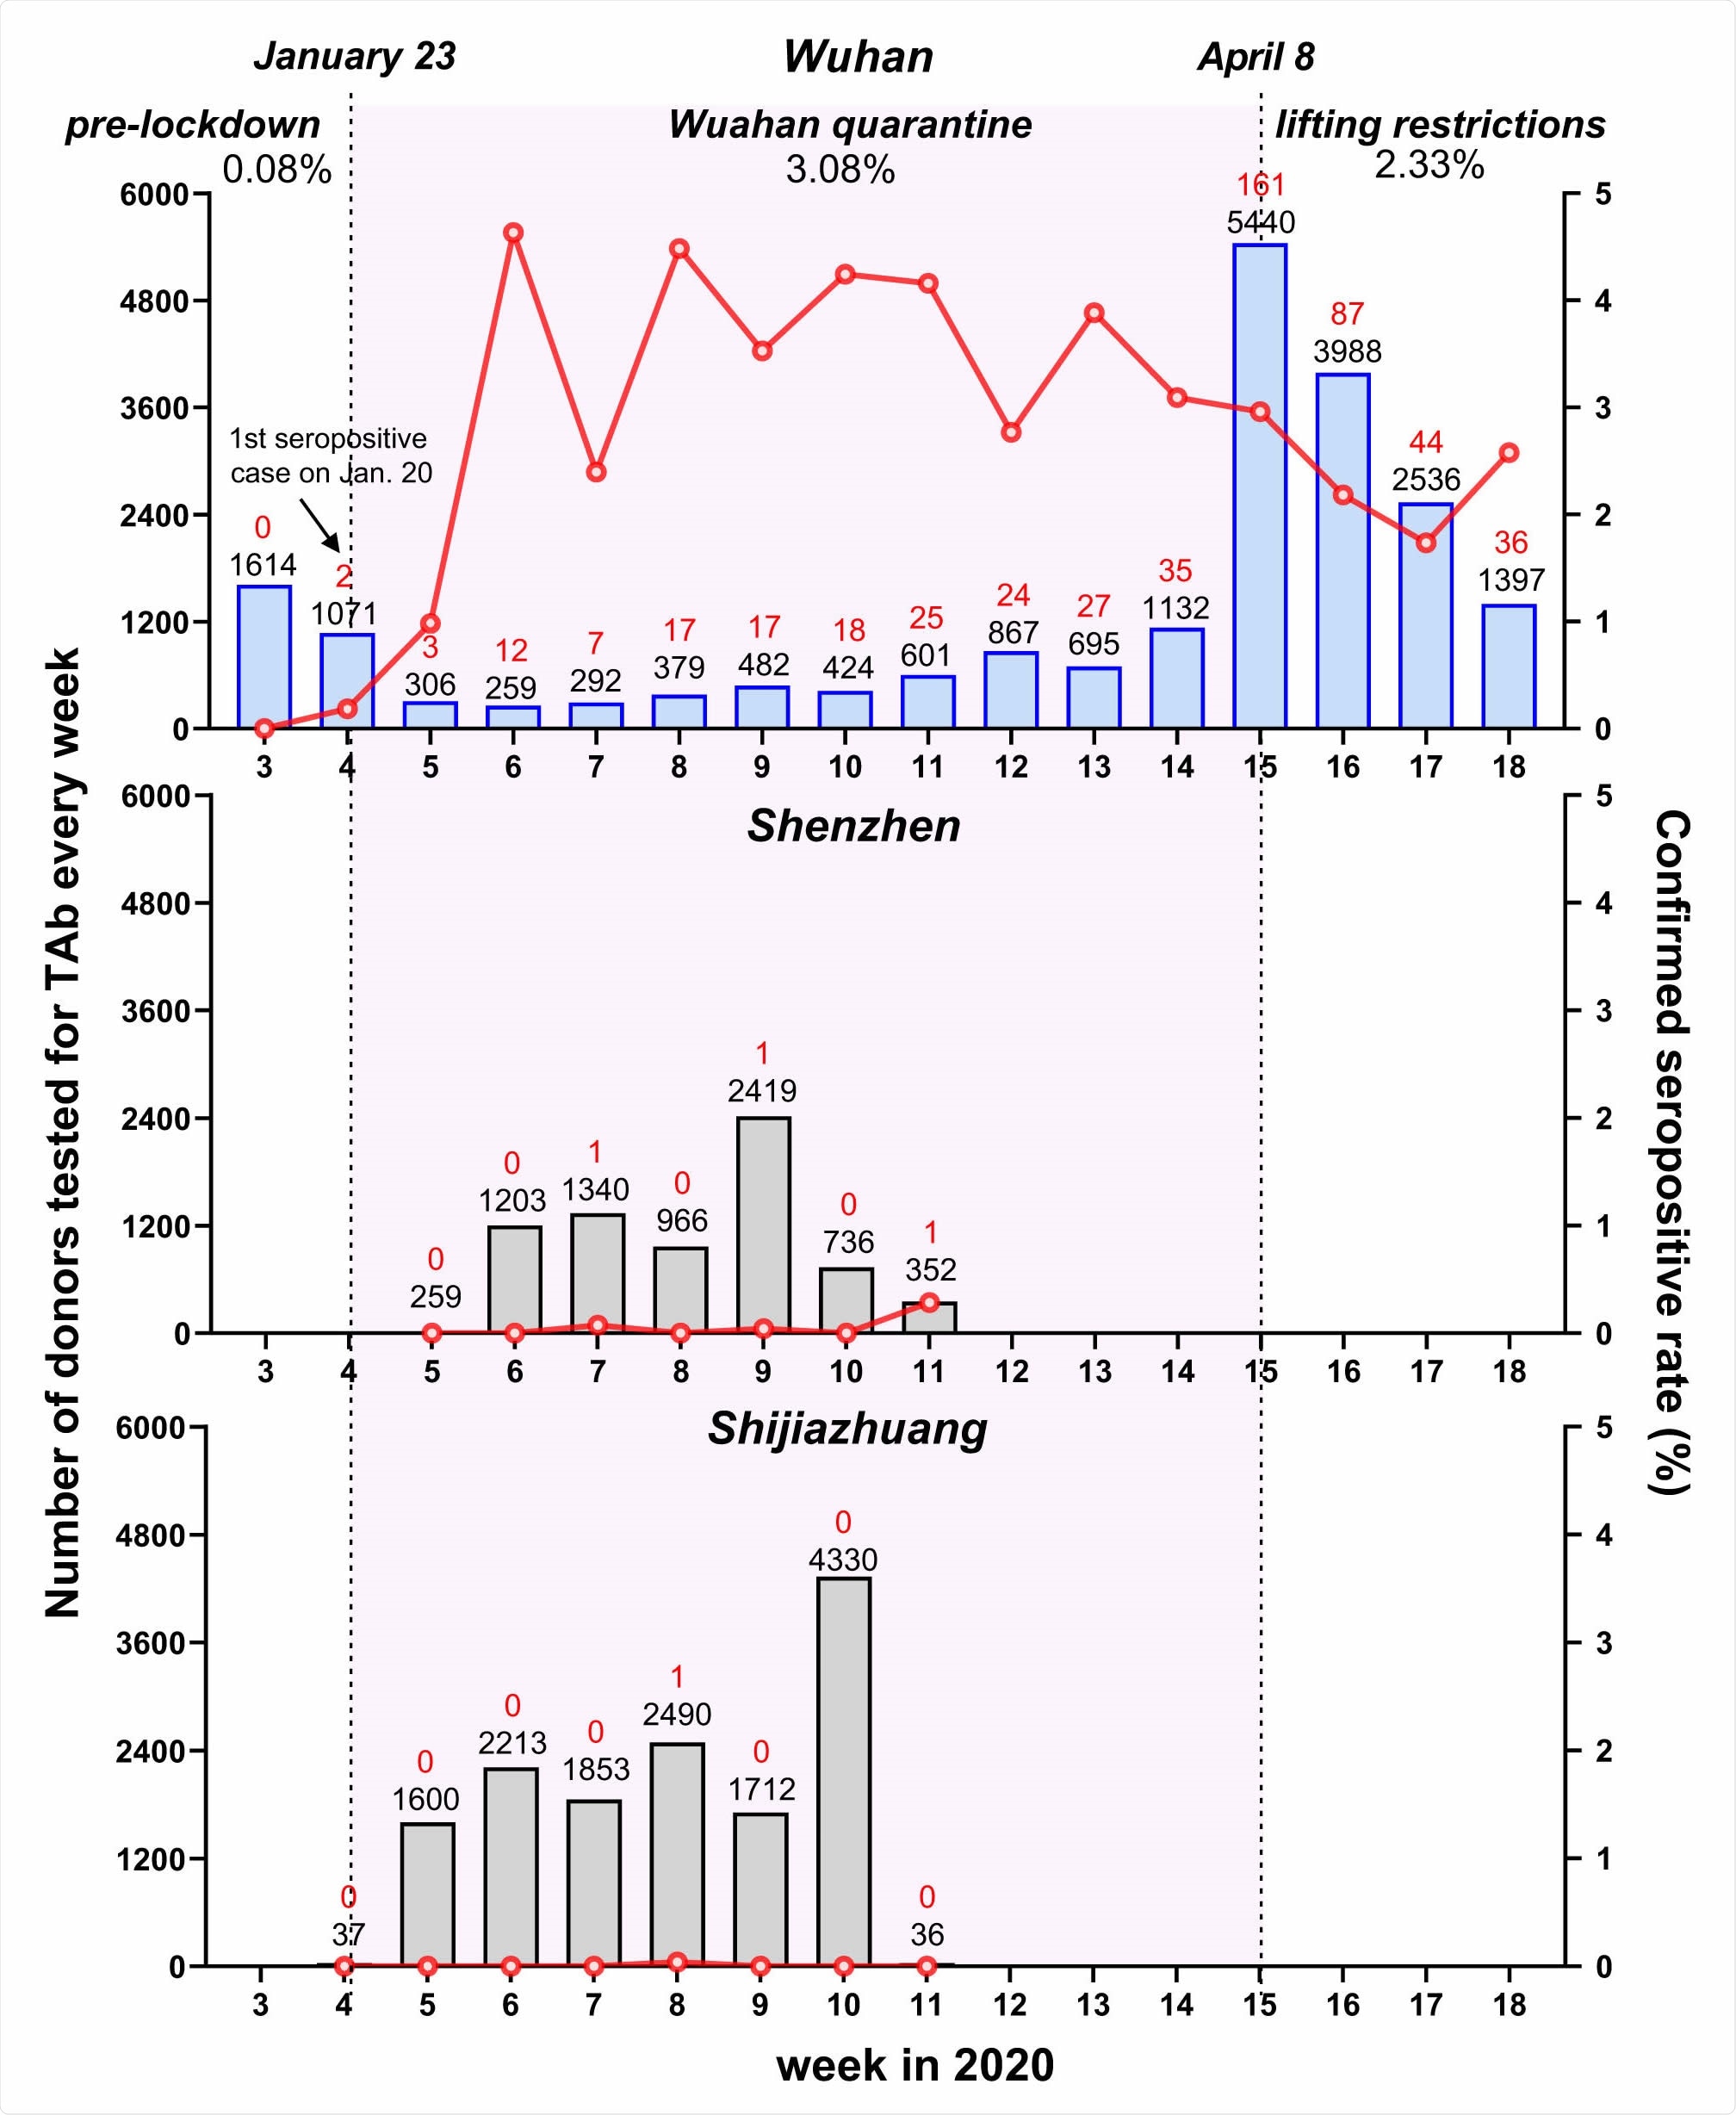 Weekly seroprevalence of SARS-CoV-2 antibody during different periods from January to April 2020 in the cities of Wuhan, Shenzhen and Shijiazhuang